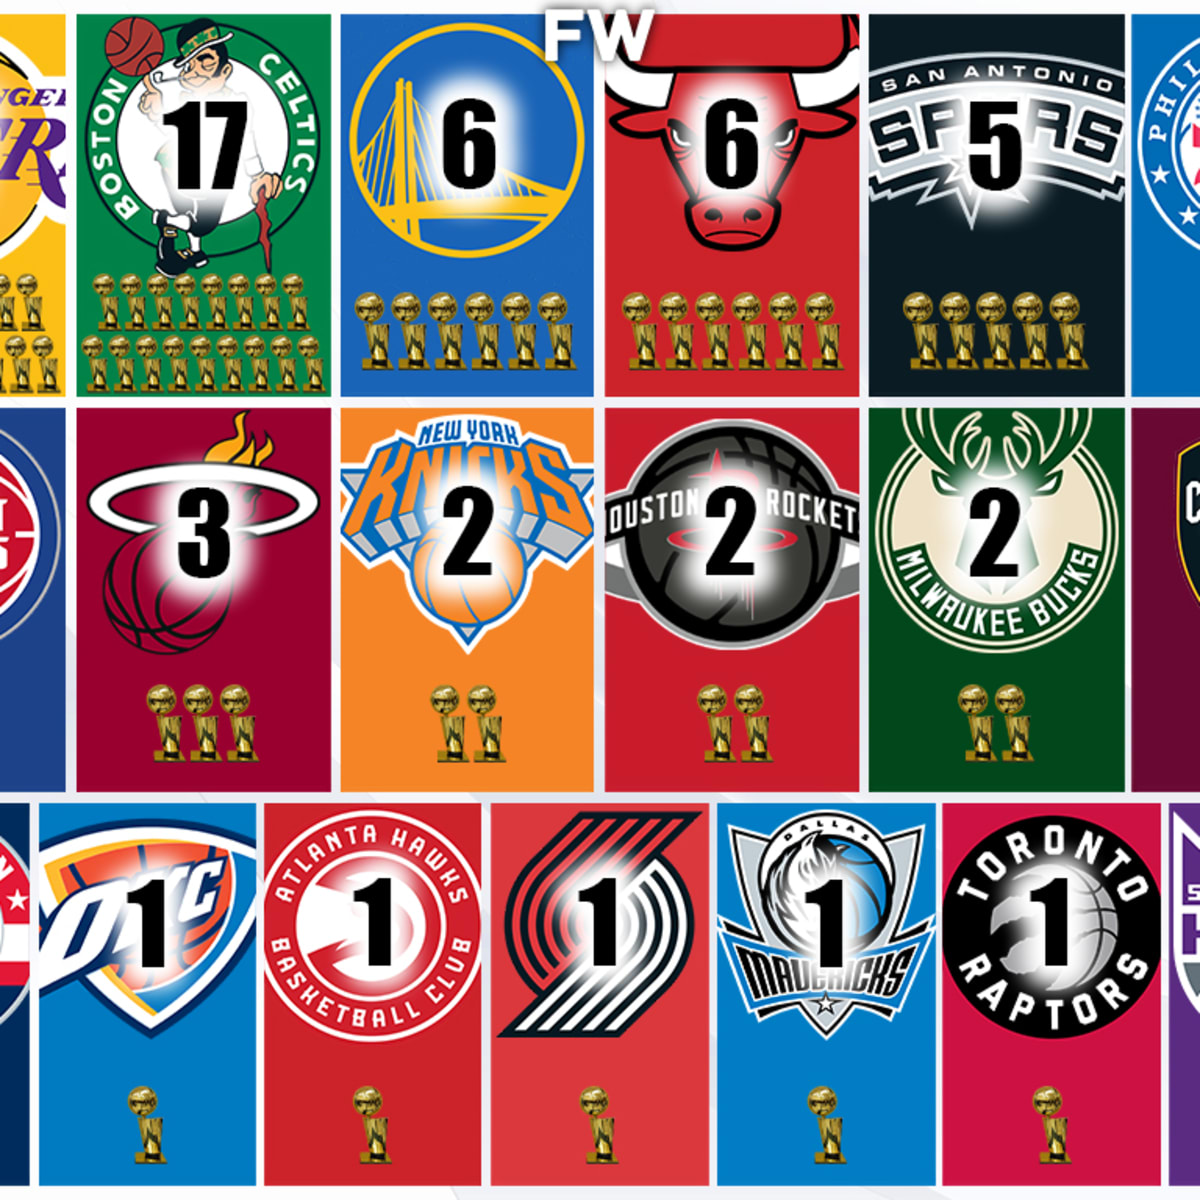 What's the most championships Boston teams have won in one year?